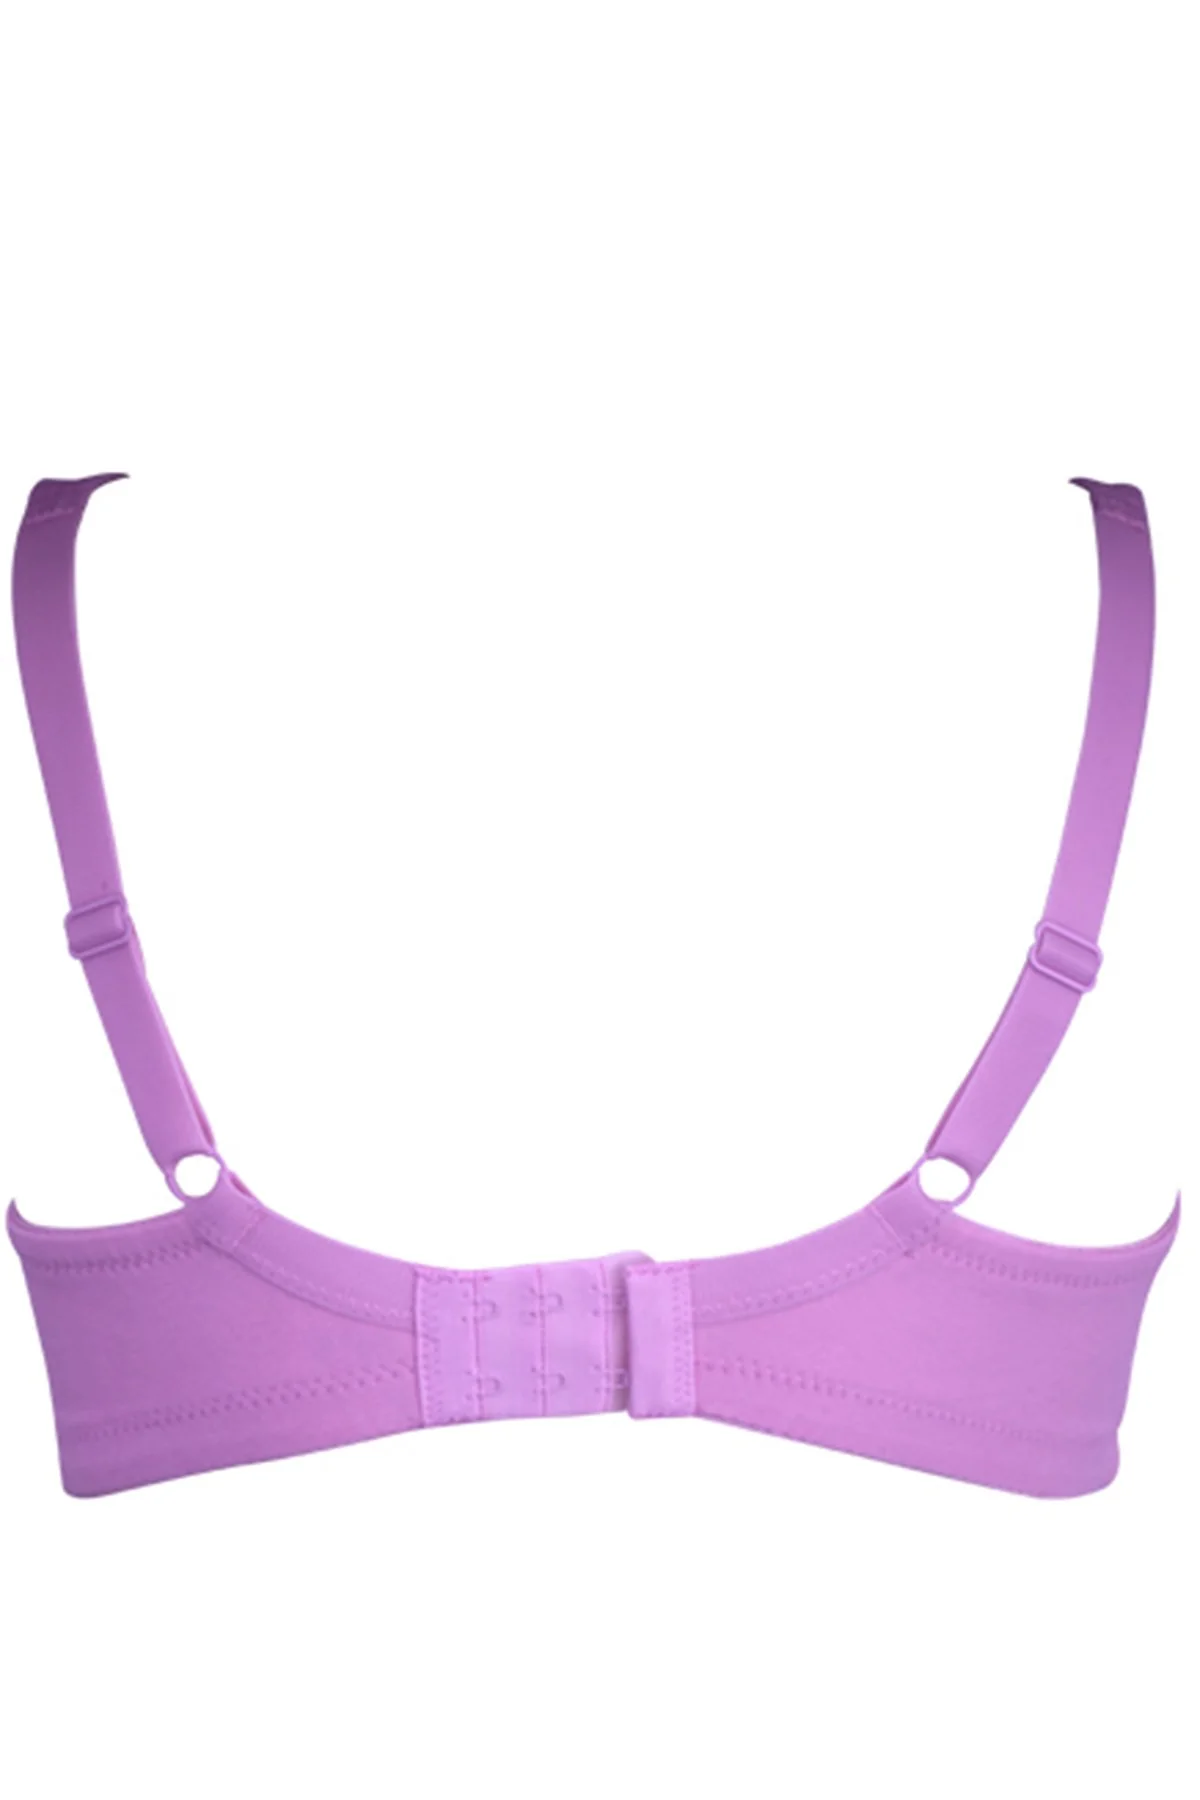 Bls - Cece Non Wired And Non Paded Bra Pink - Highfy.pk